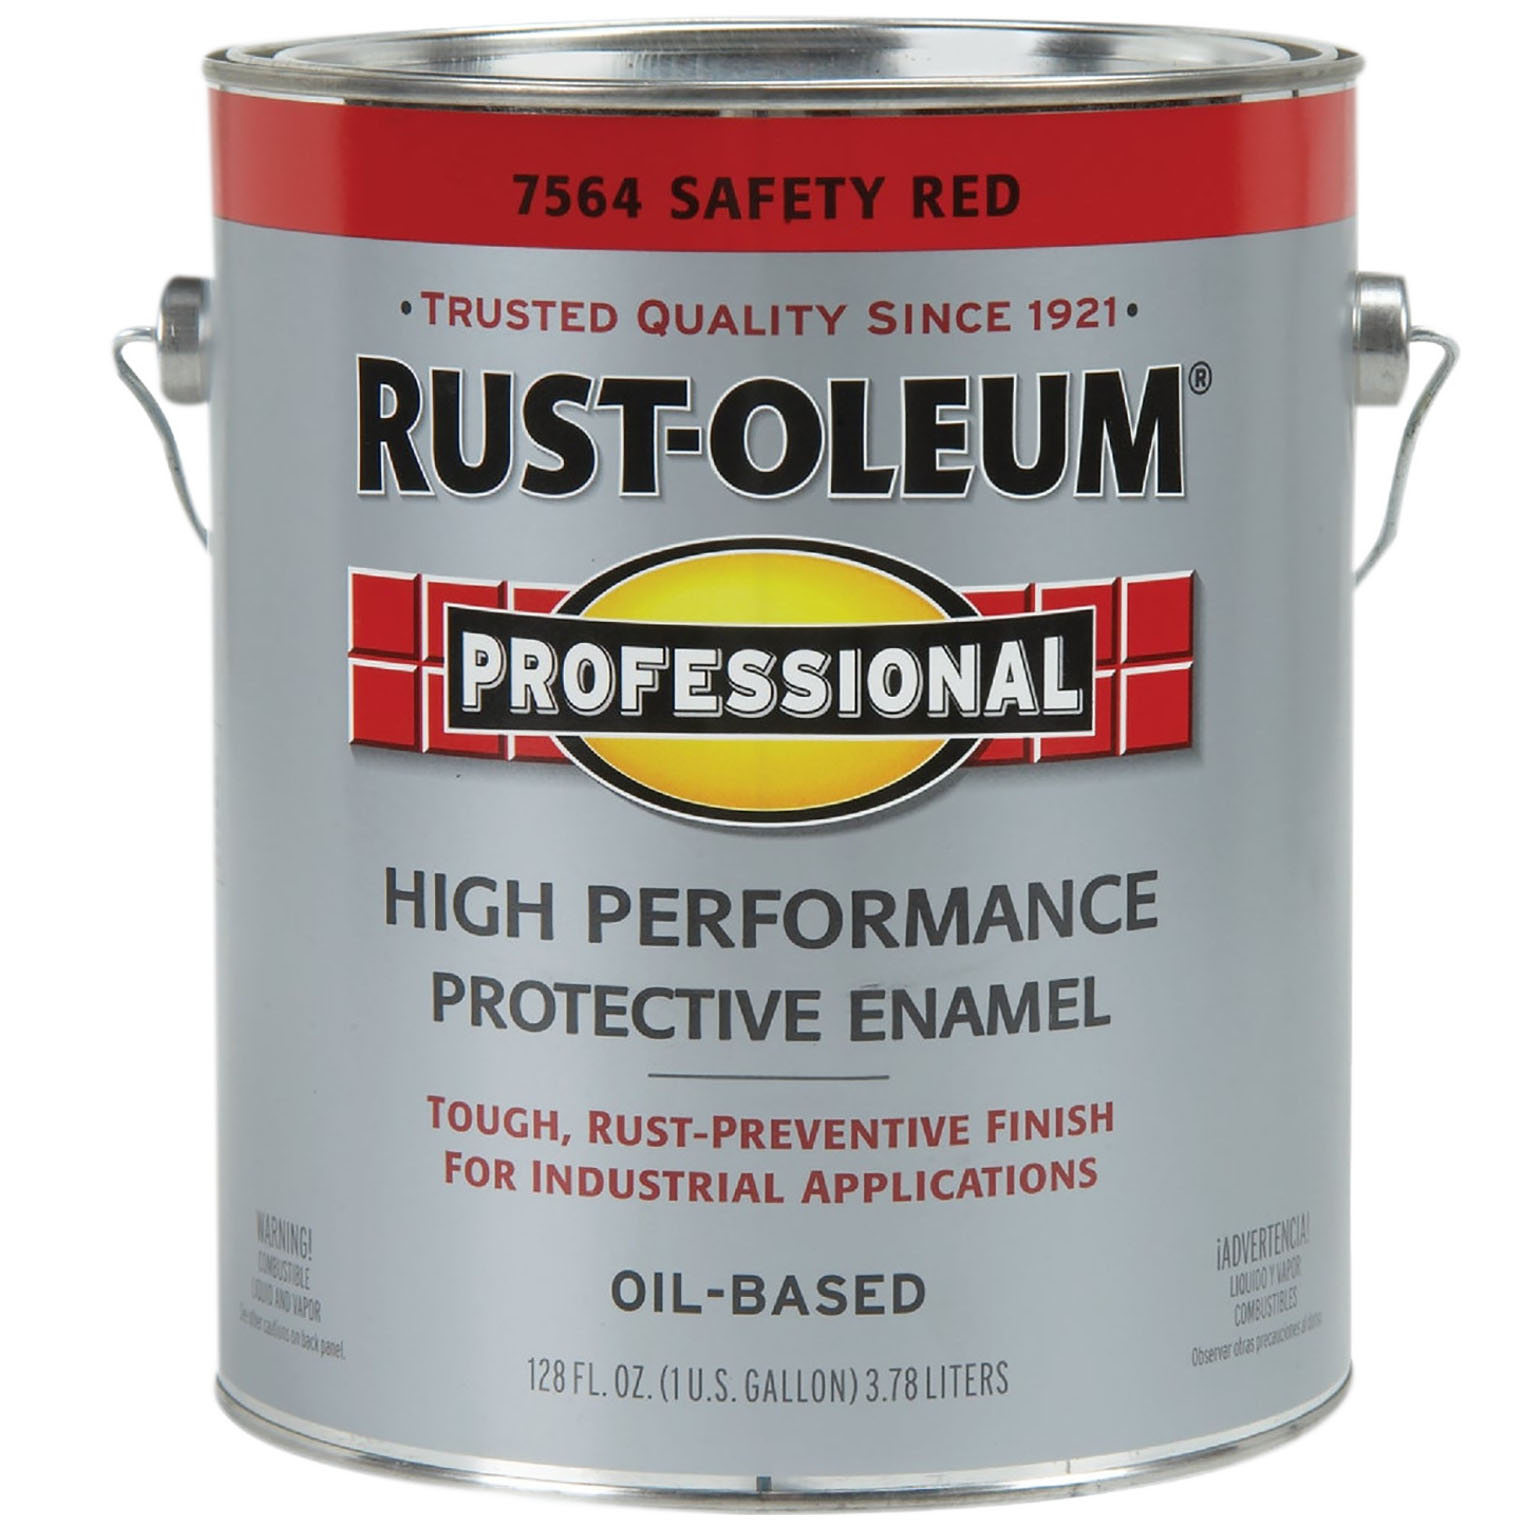 Professional 7564402 Enamel Paint, Oil, Gloss, Safety Red, 1 gal, Can, 230 to 390 sq-ft/gal Coverage Area